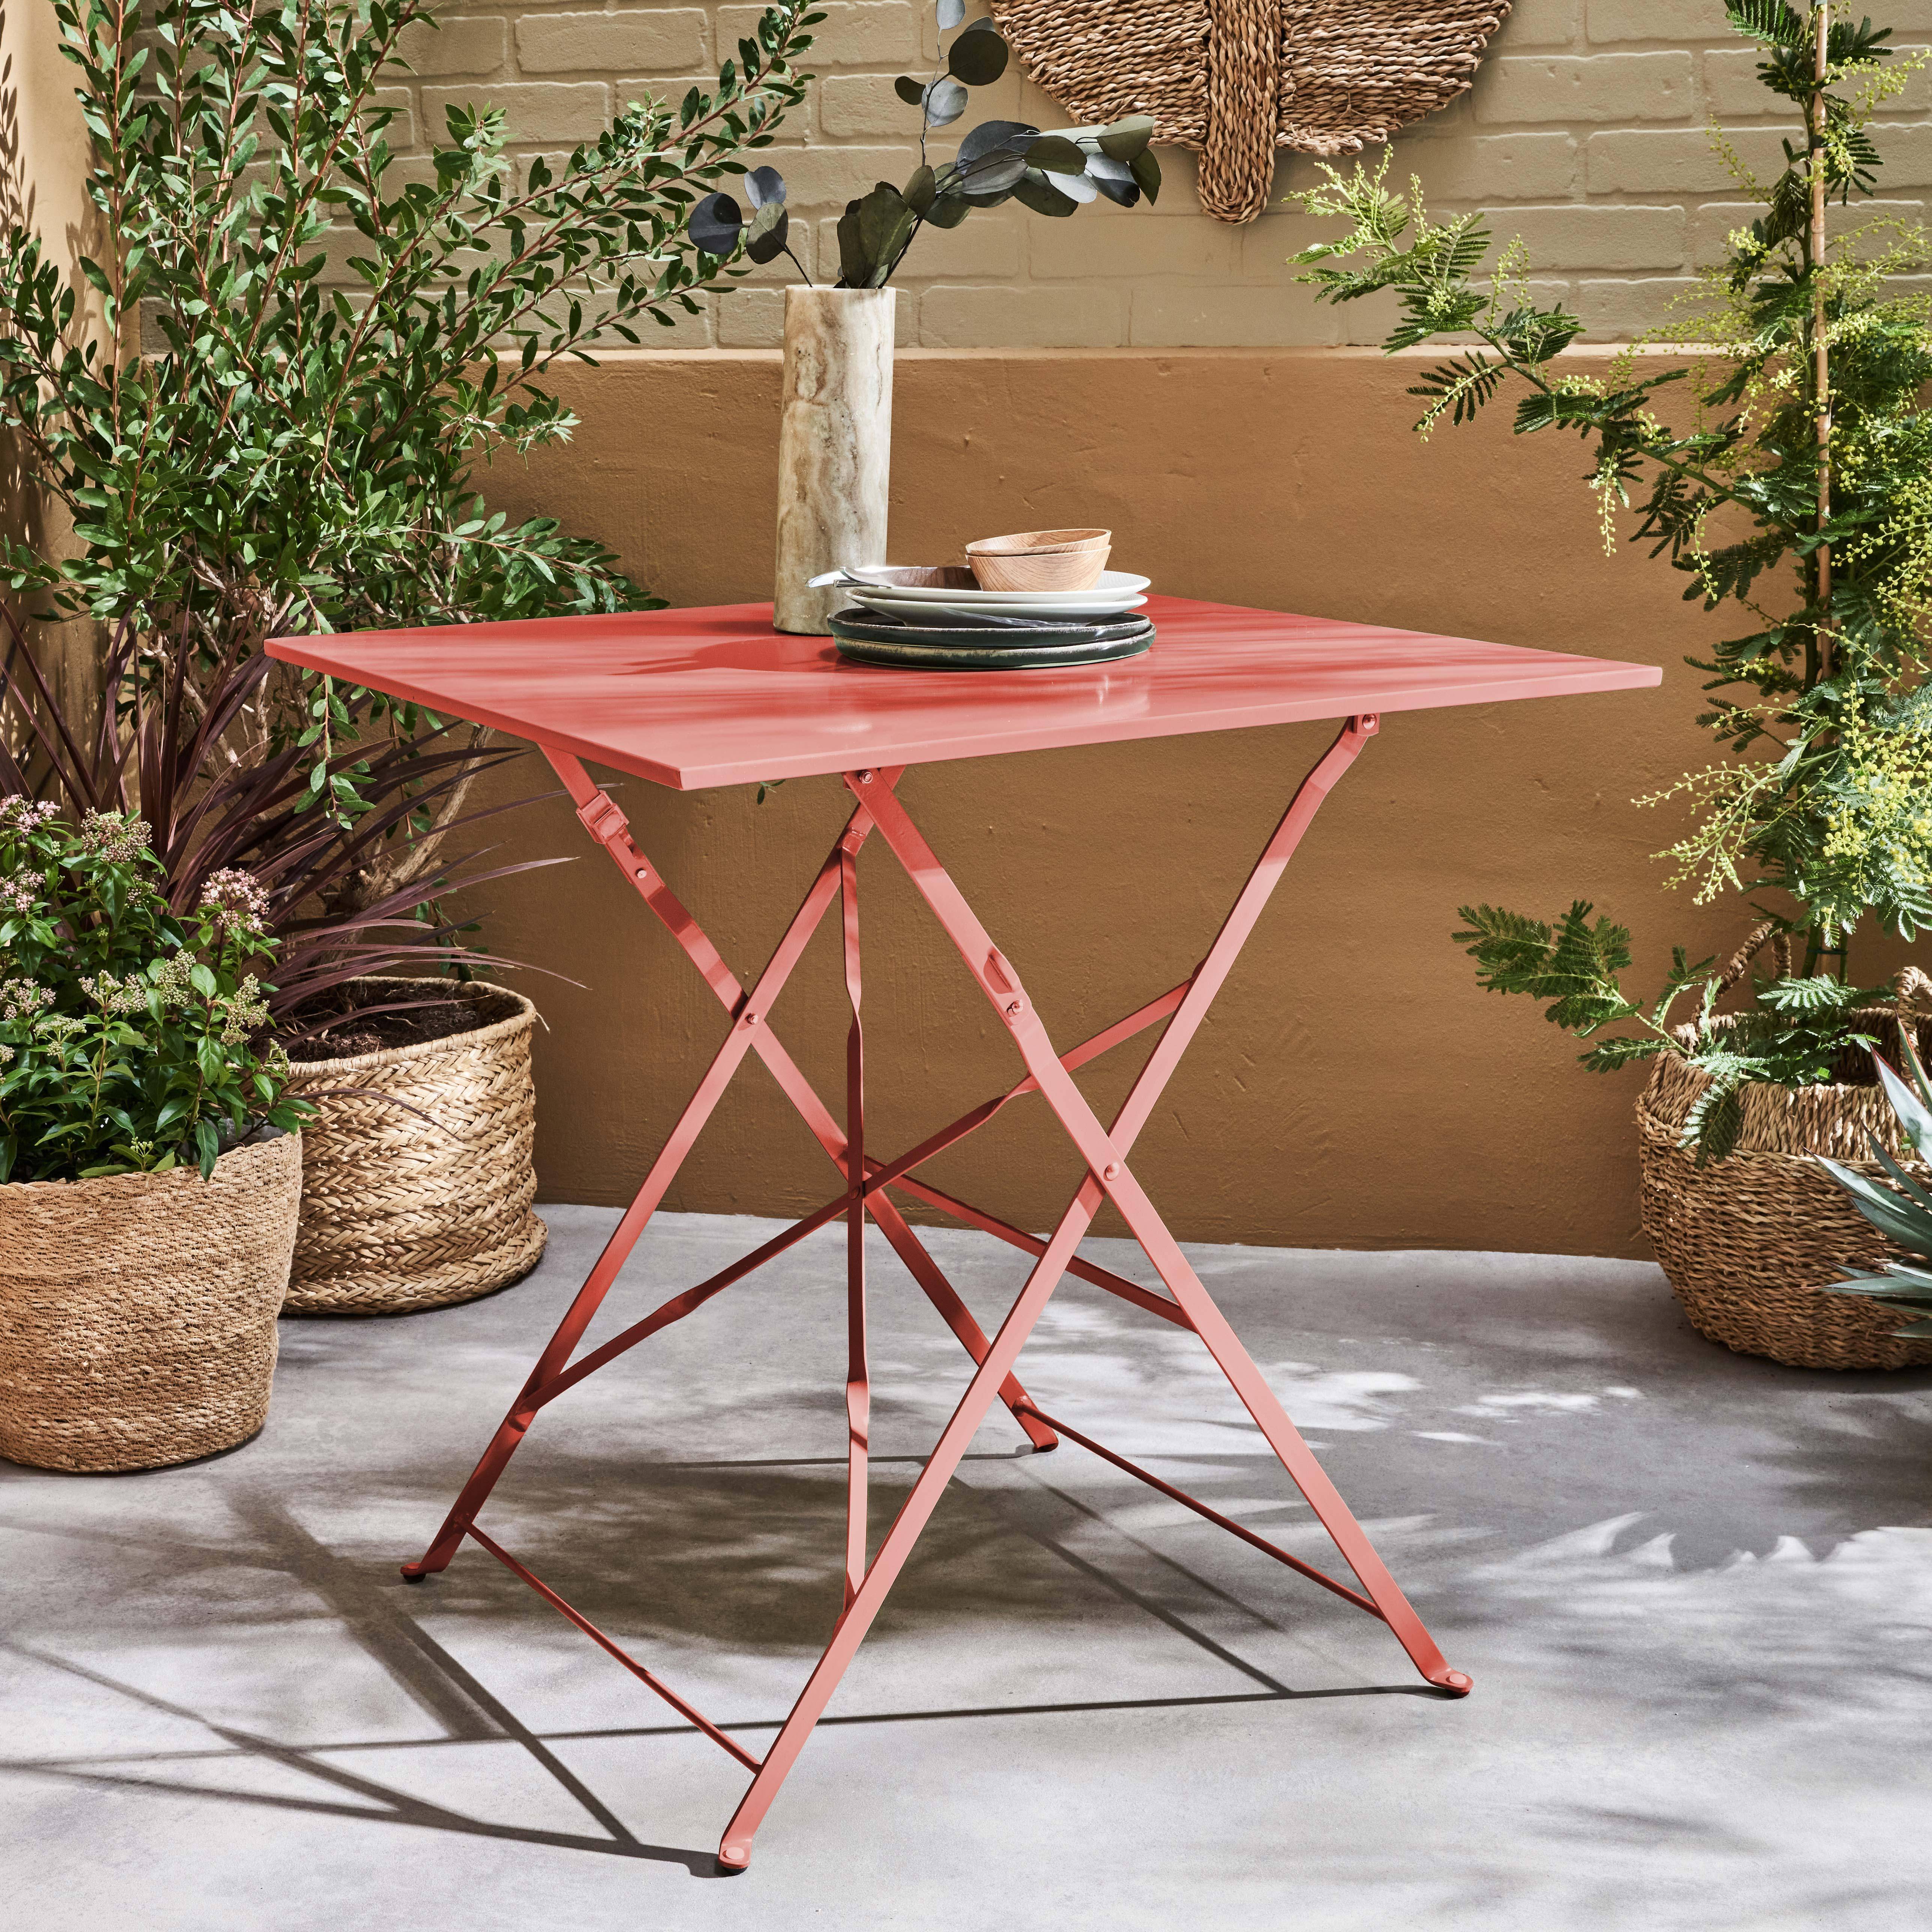 2-seater foldable thermo-lacquered steel bistro garden table, 70x70cm - Emilia - Terracotta,sweeek,Photo1